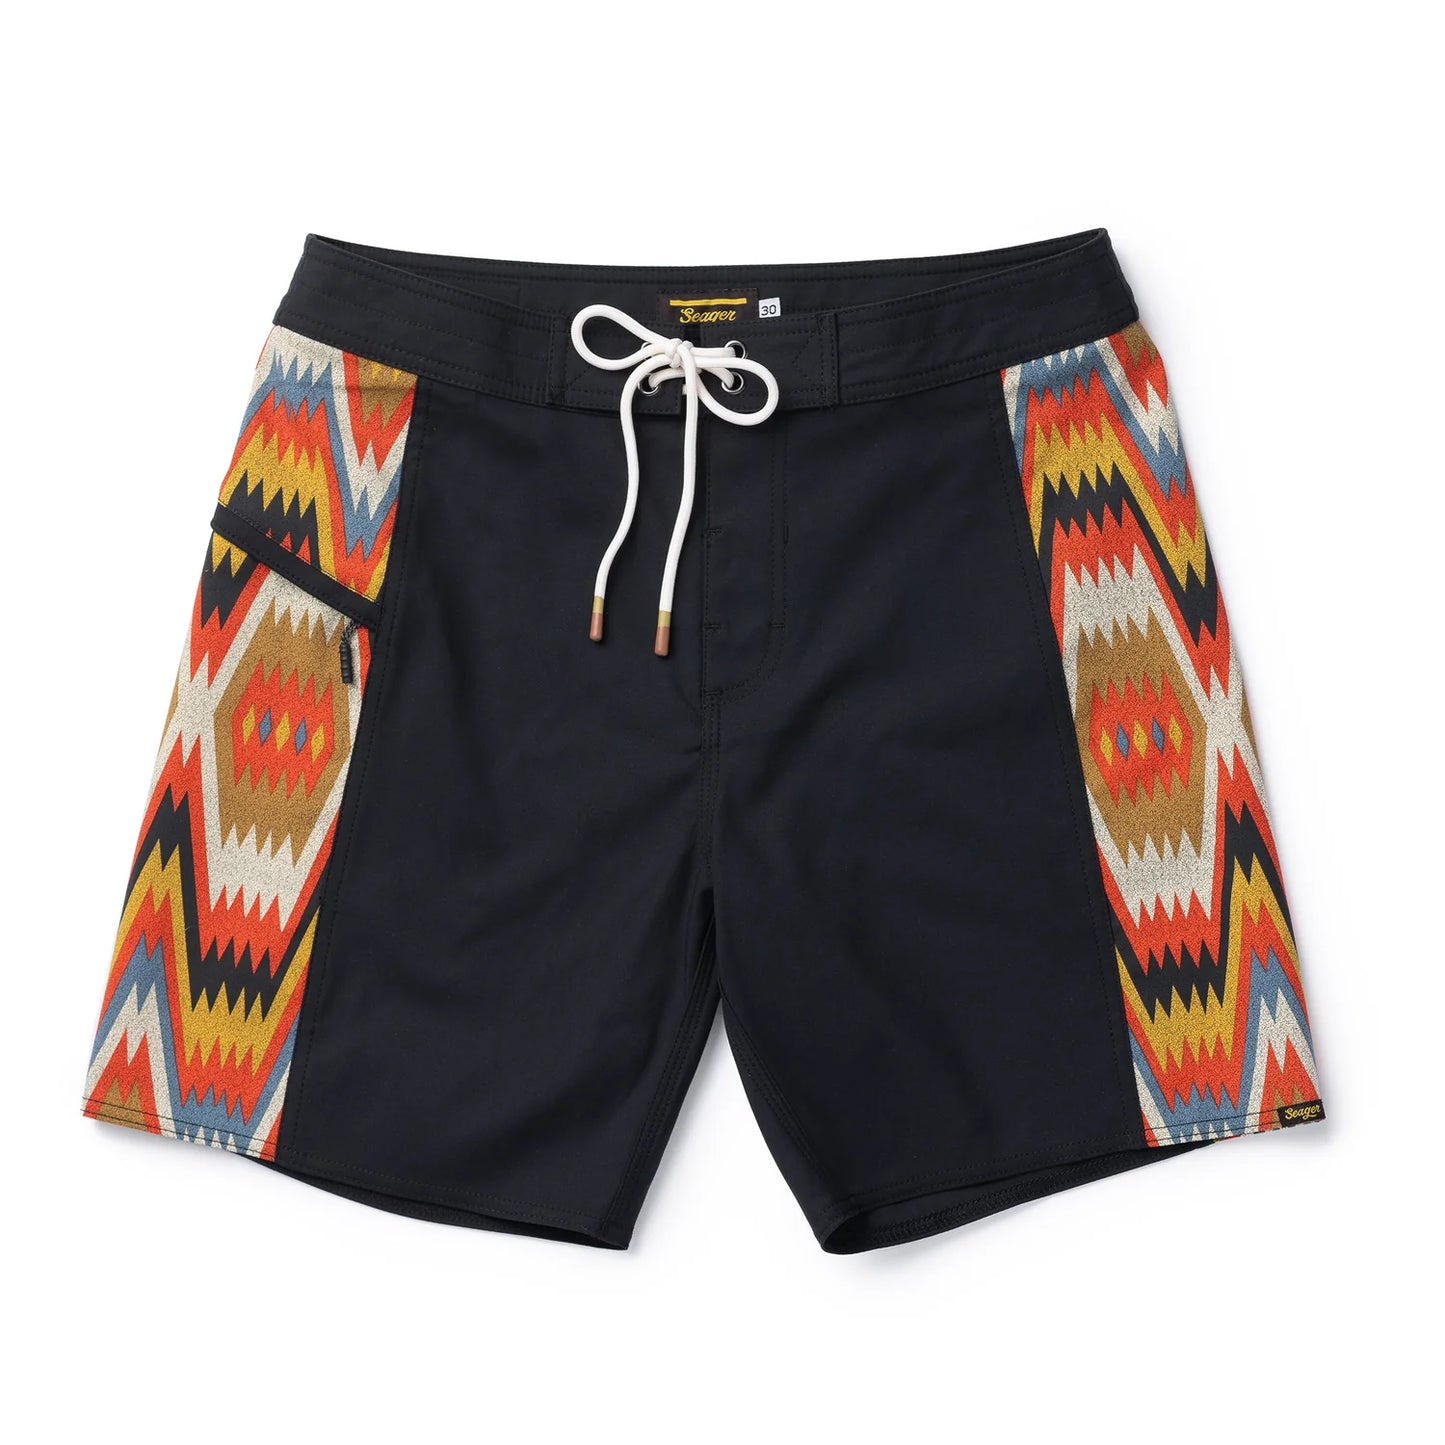 SEAGER CHICKASAW PANEL BOARDSHORTS